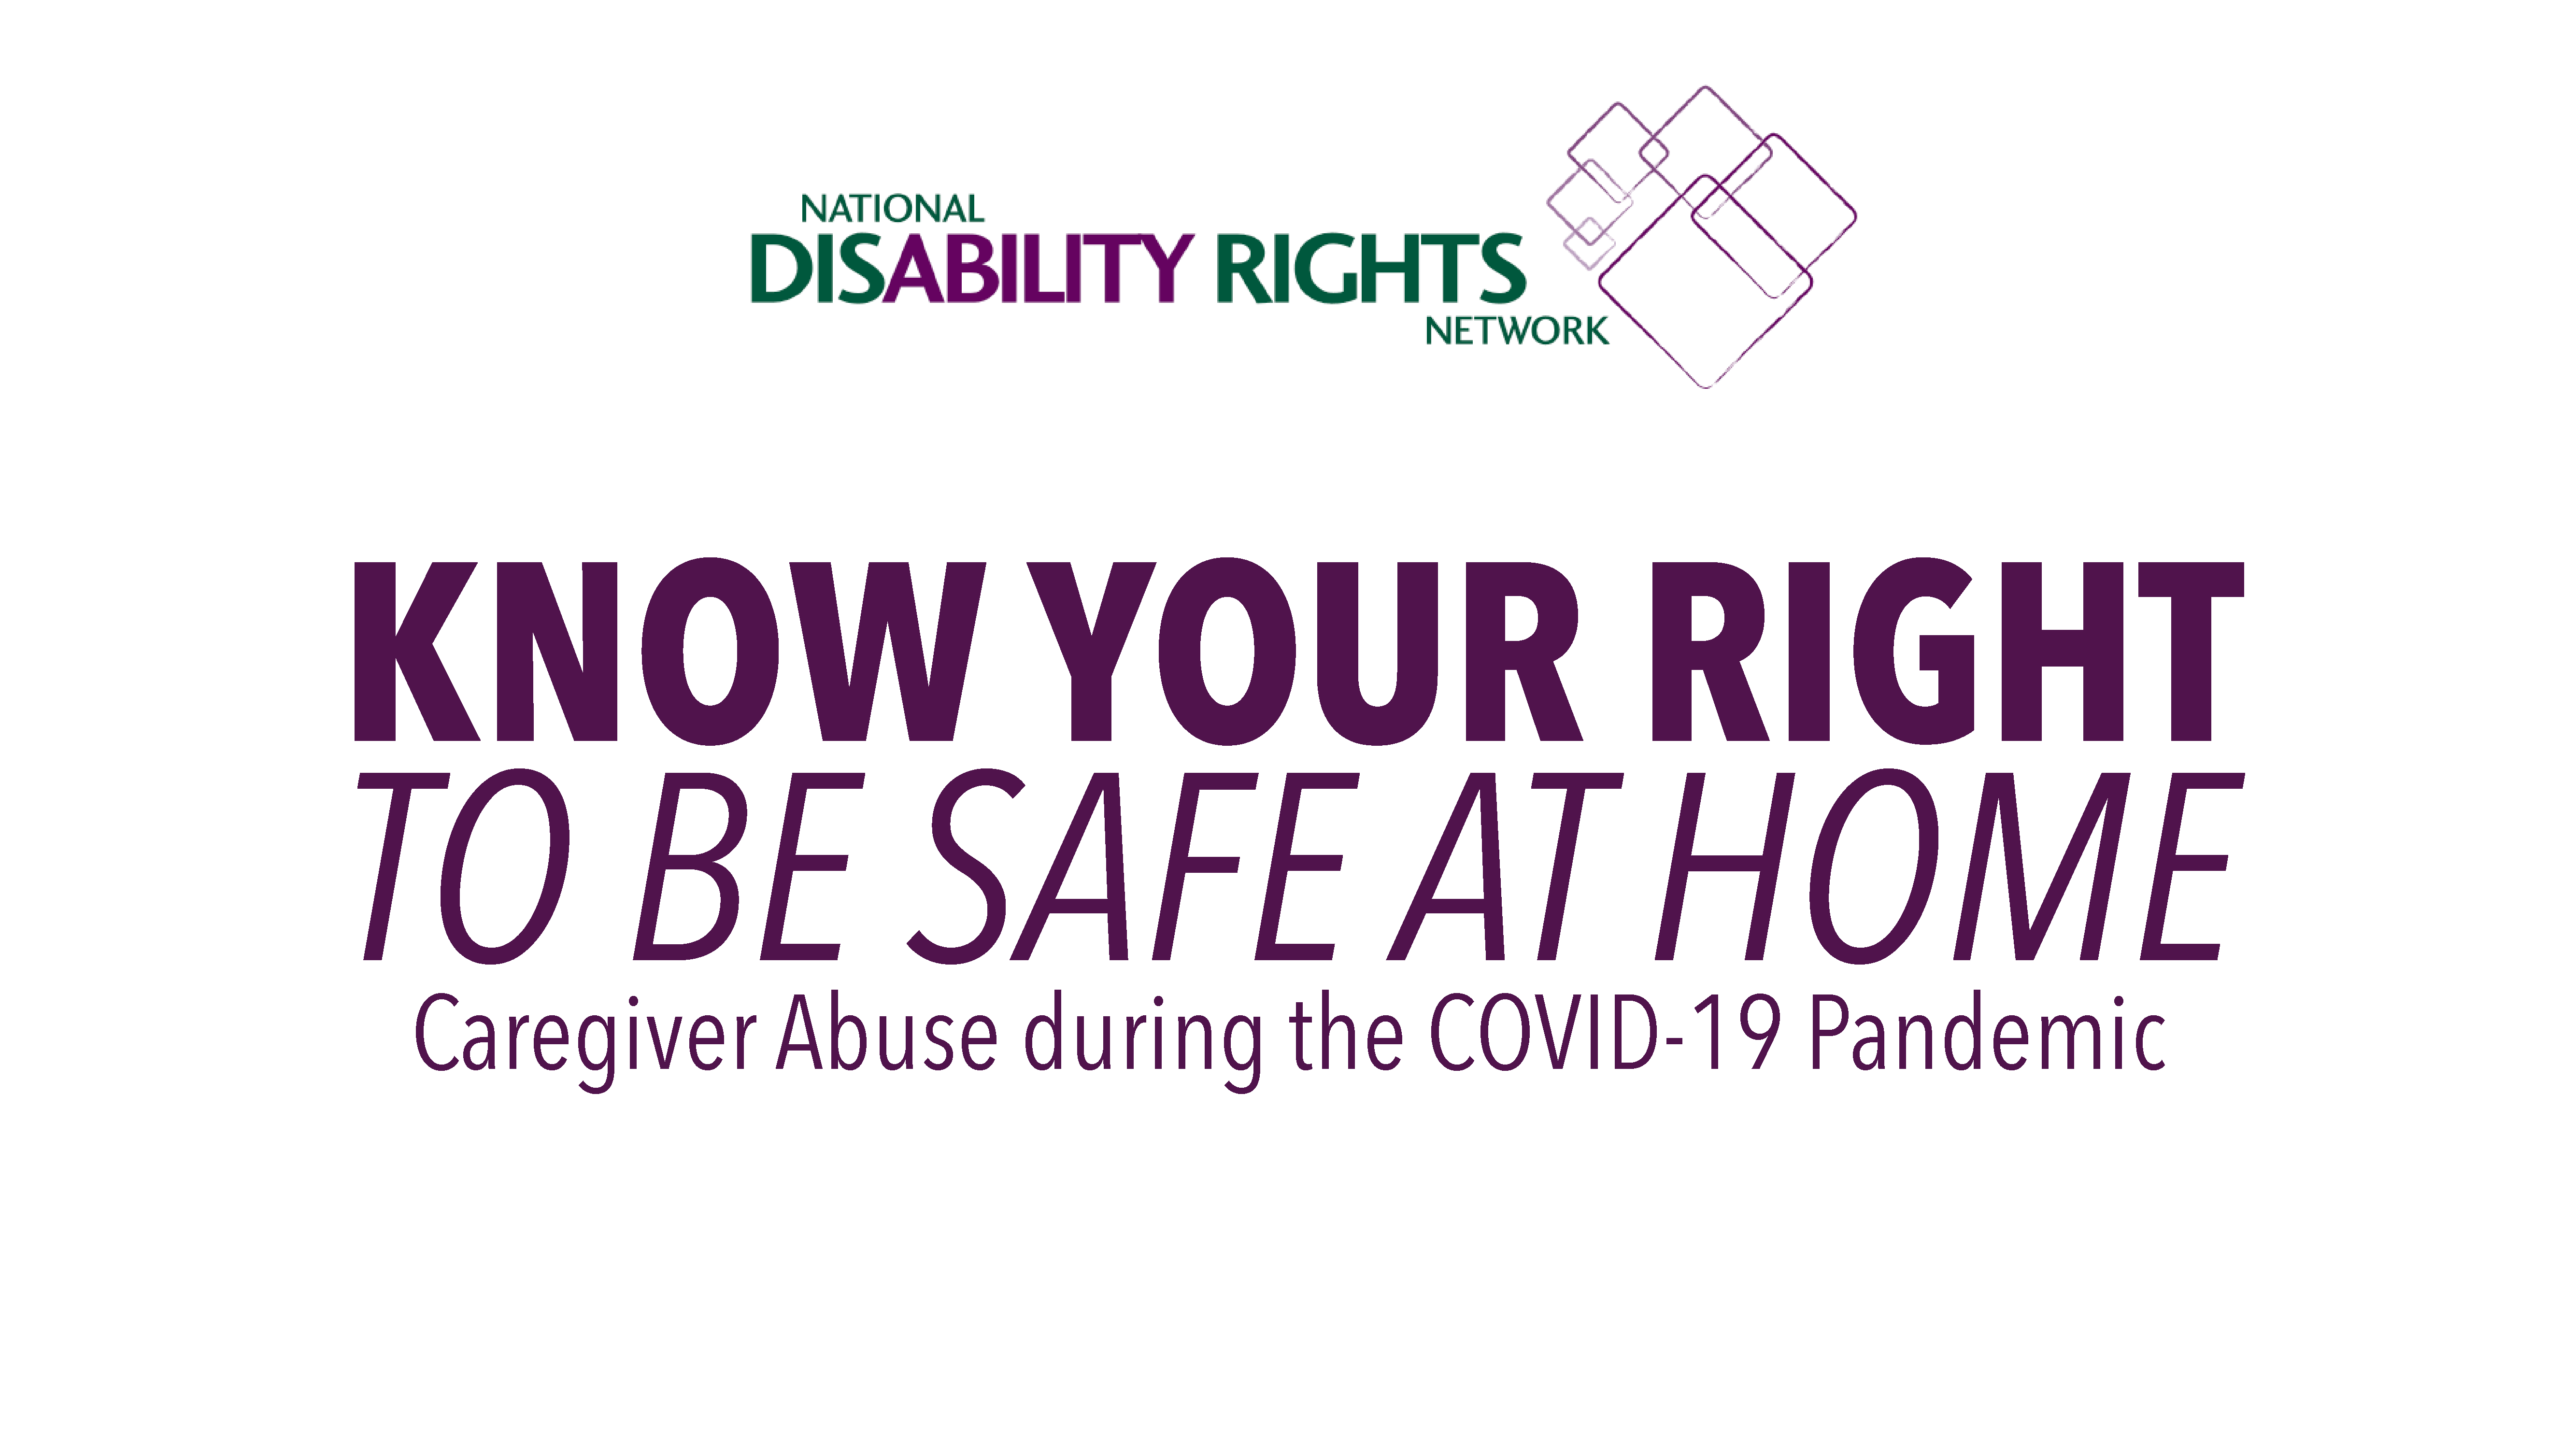 Know Your Right to be Safe at home - Caregiver abuseduring the COVID-19 Pandemic